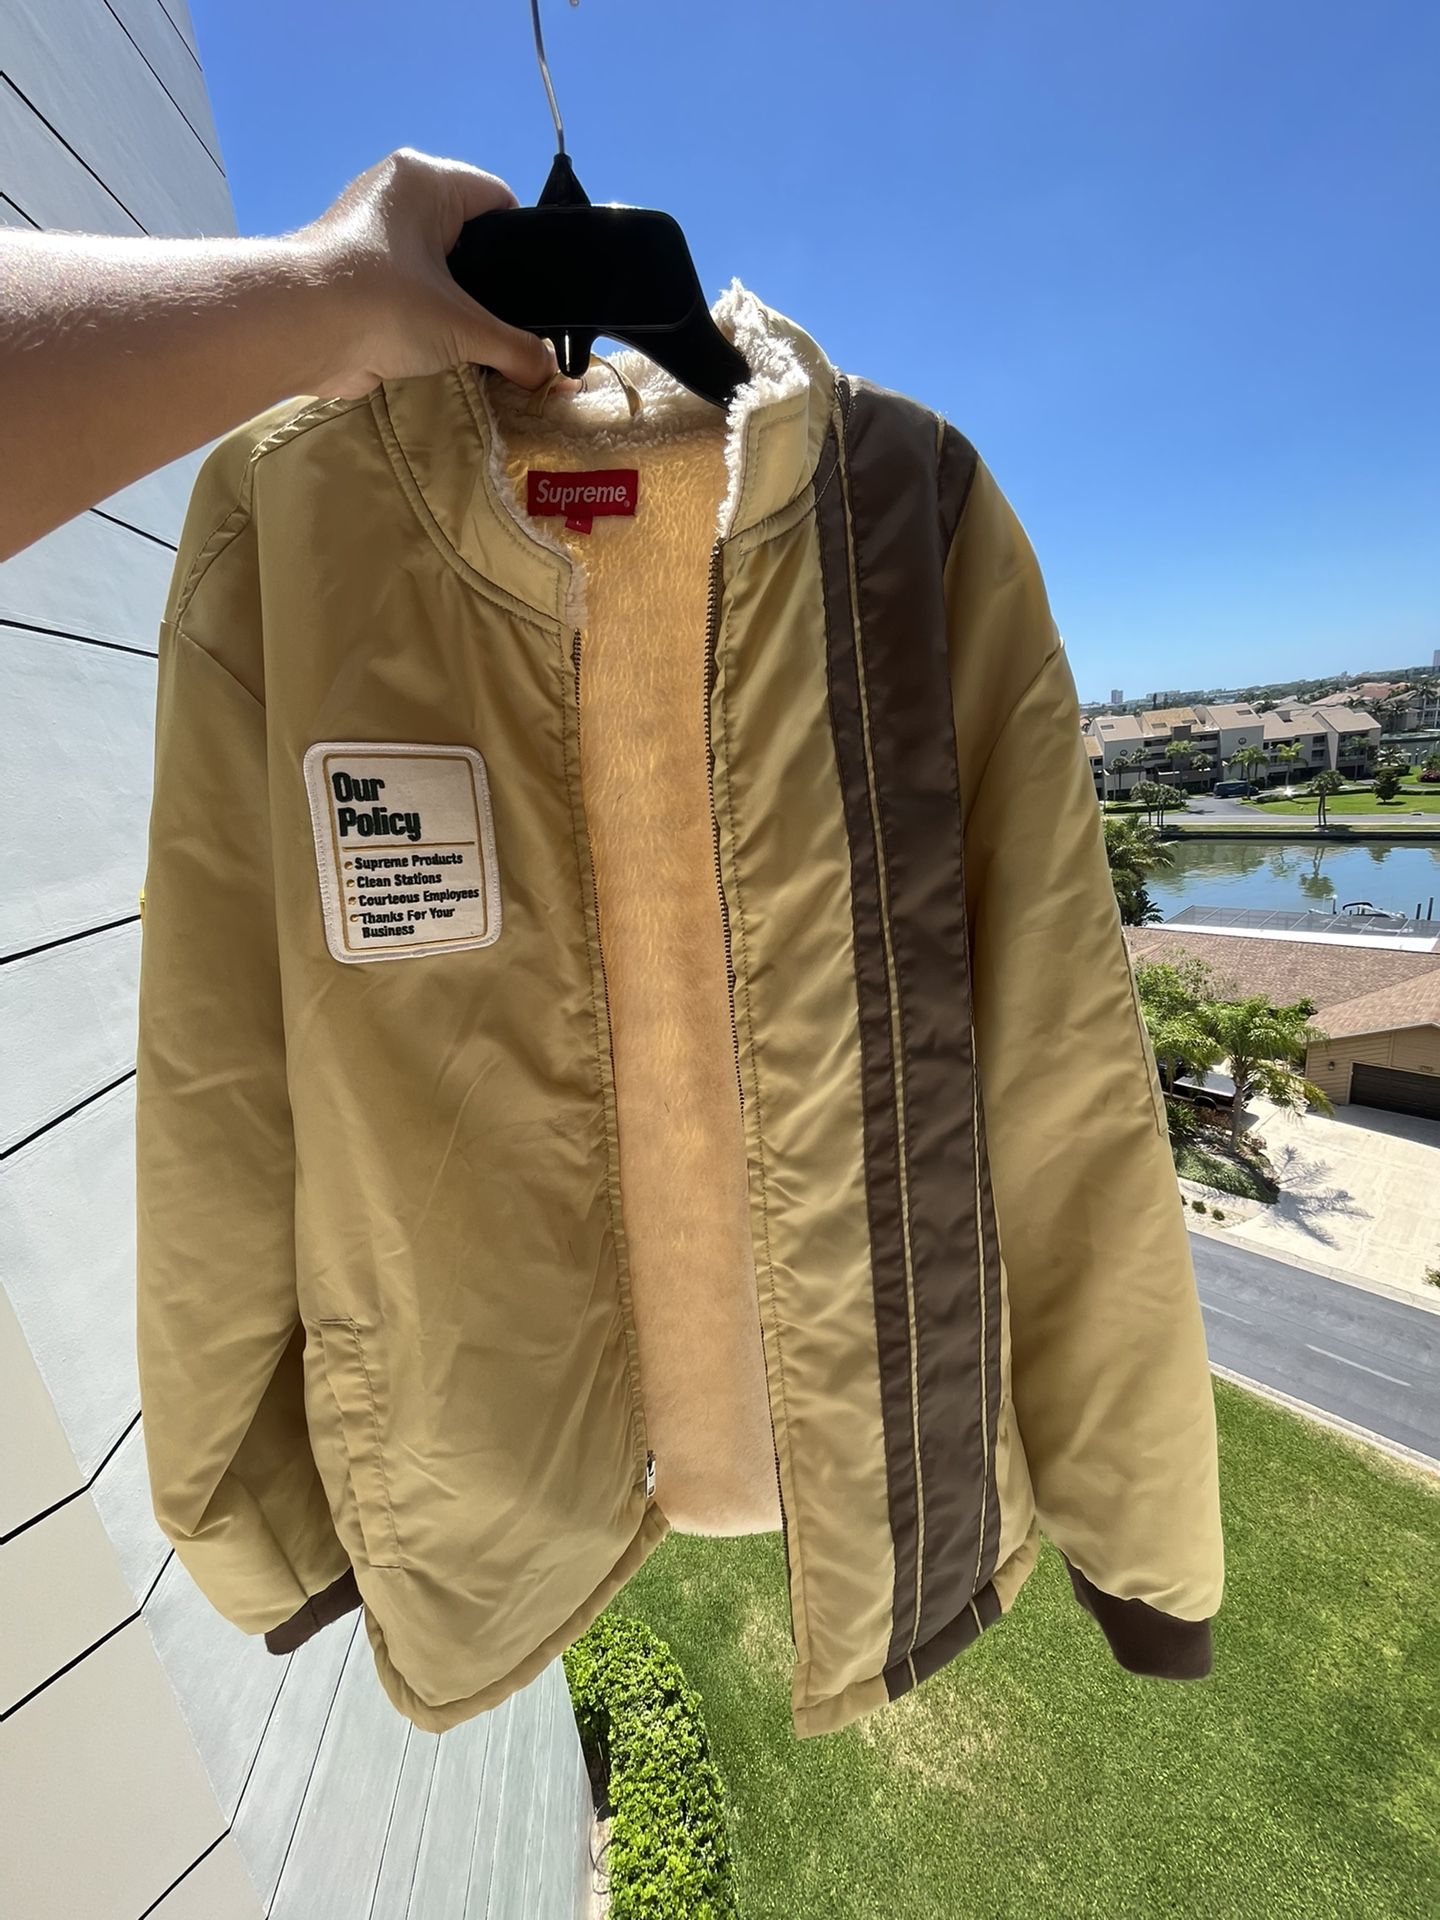 Supreme pit crew bomber jacket for Sale in Gulfport, FL - OfferUp